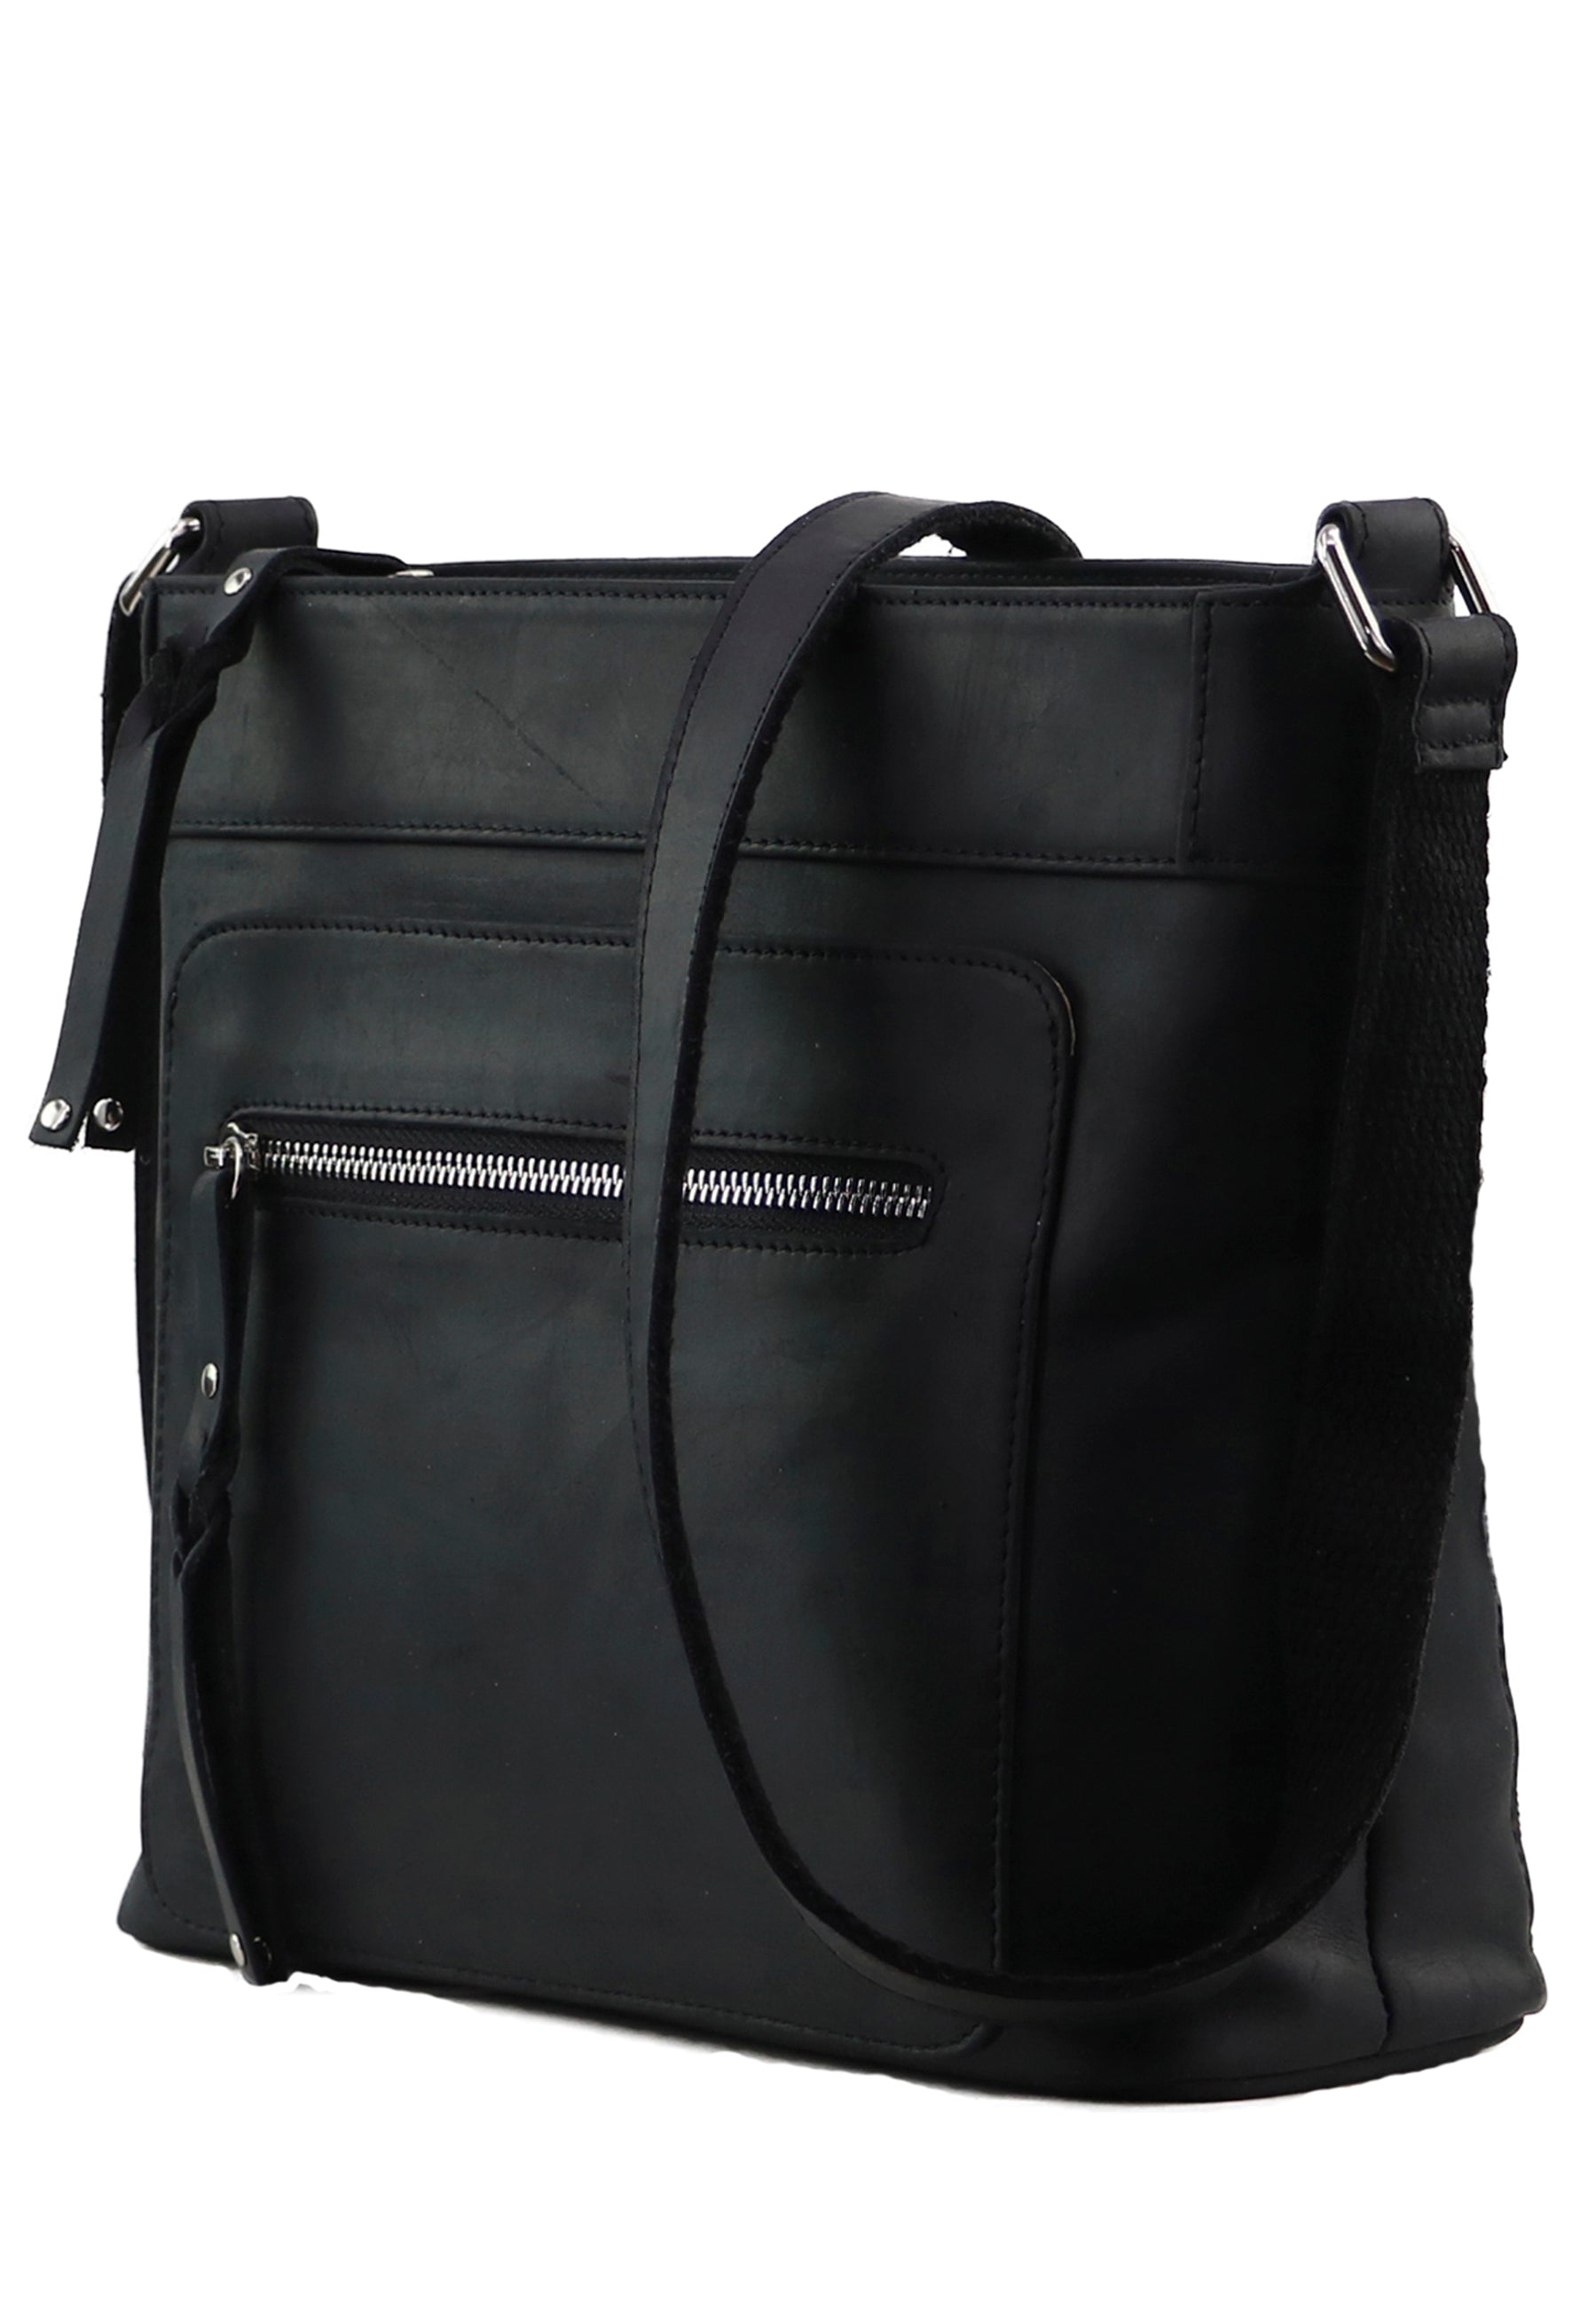 Side view of black leather conceal carry hand bag